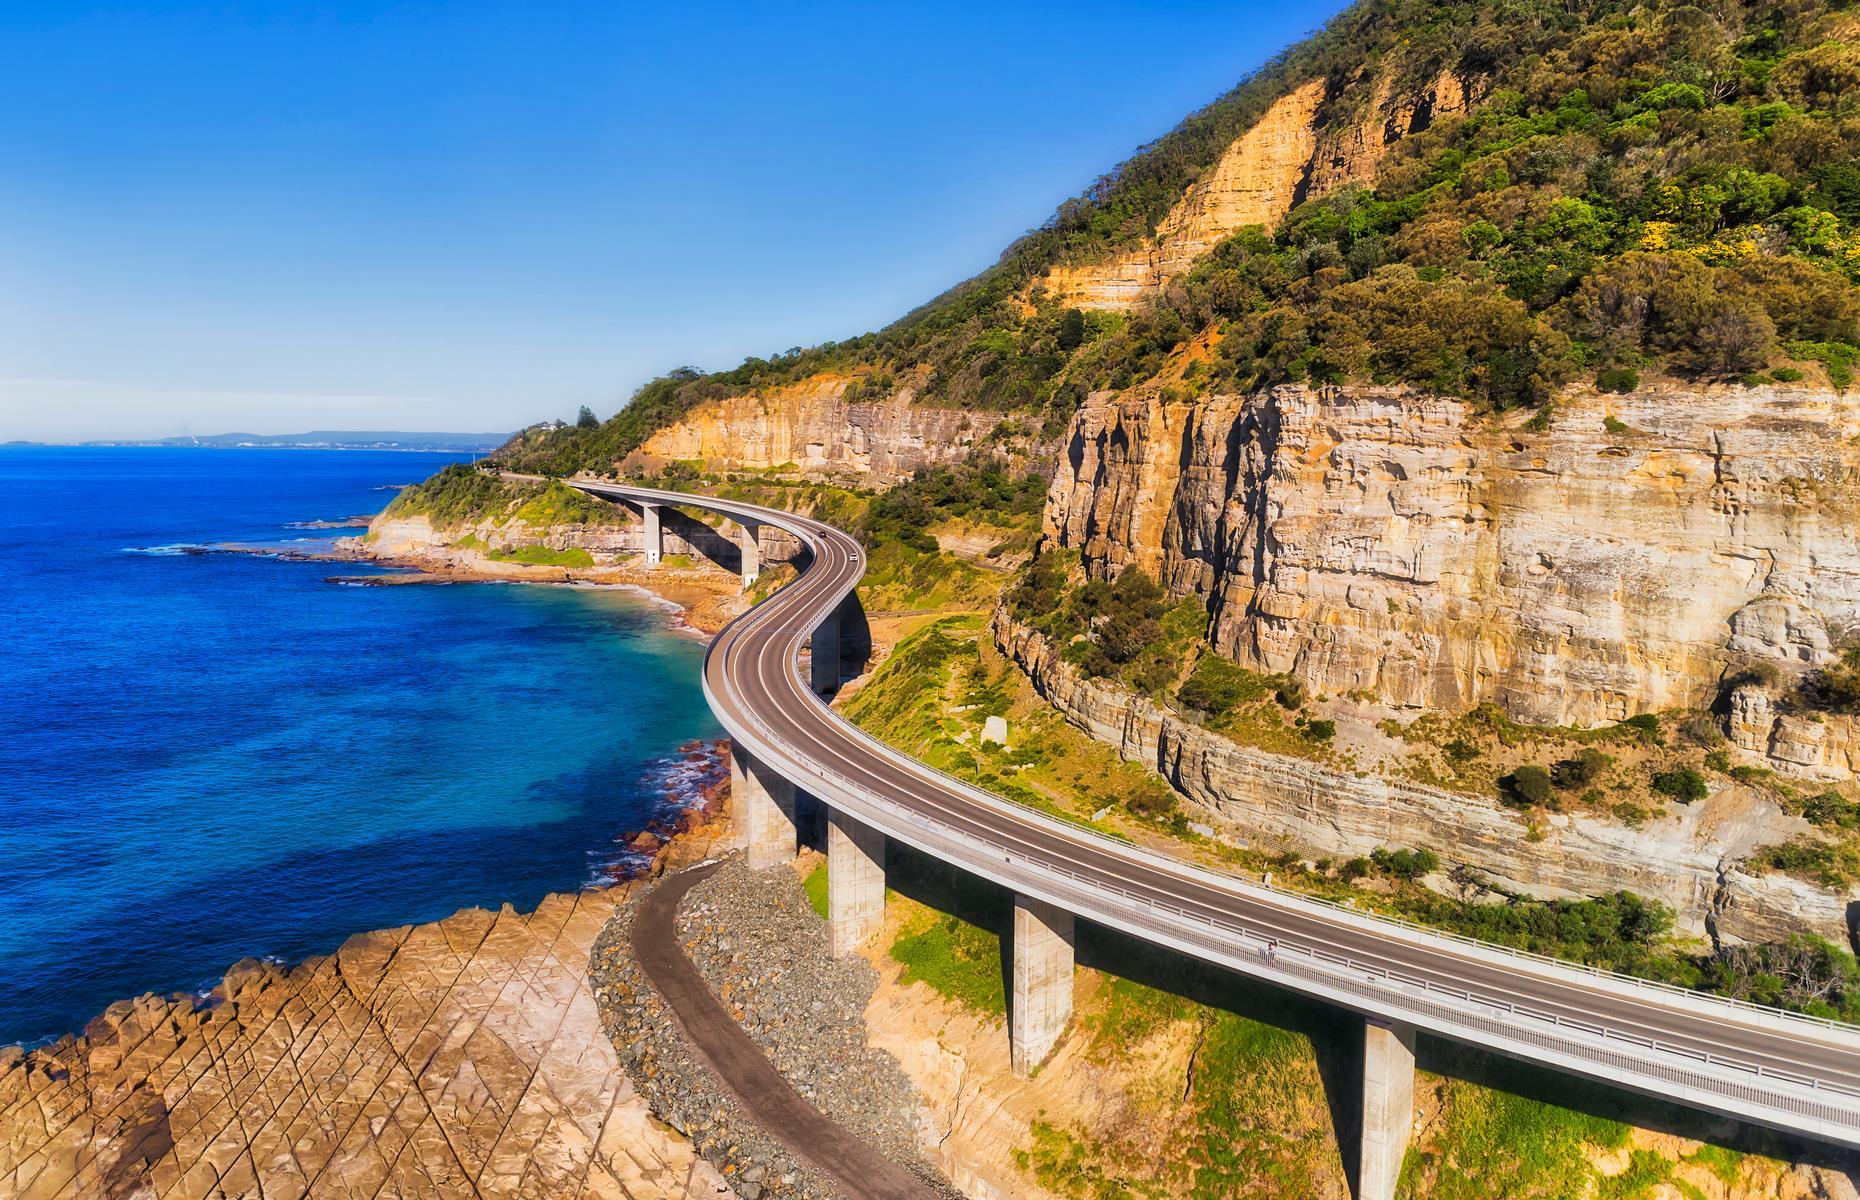 With its long, curving coastal roads, winding vineyard trails and dead straight tracks cutting through the red dirt, Australia is made for road tripping. Here are some of the best Australian adventures you can do in a long weekend.